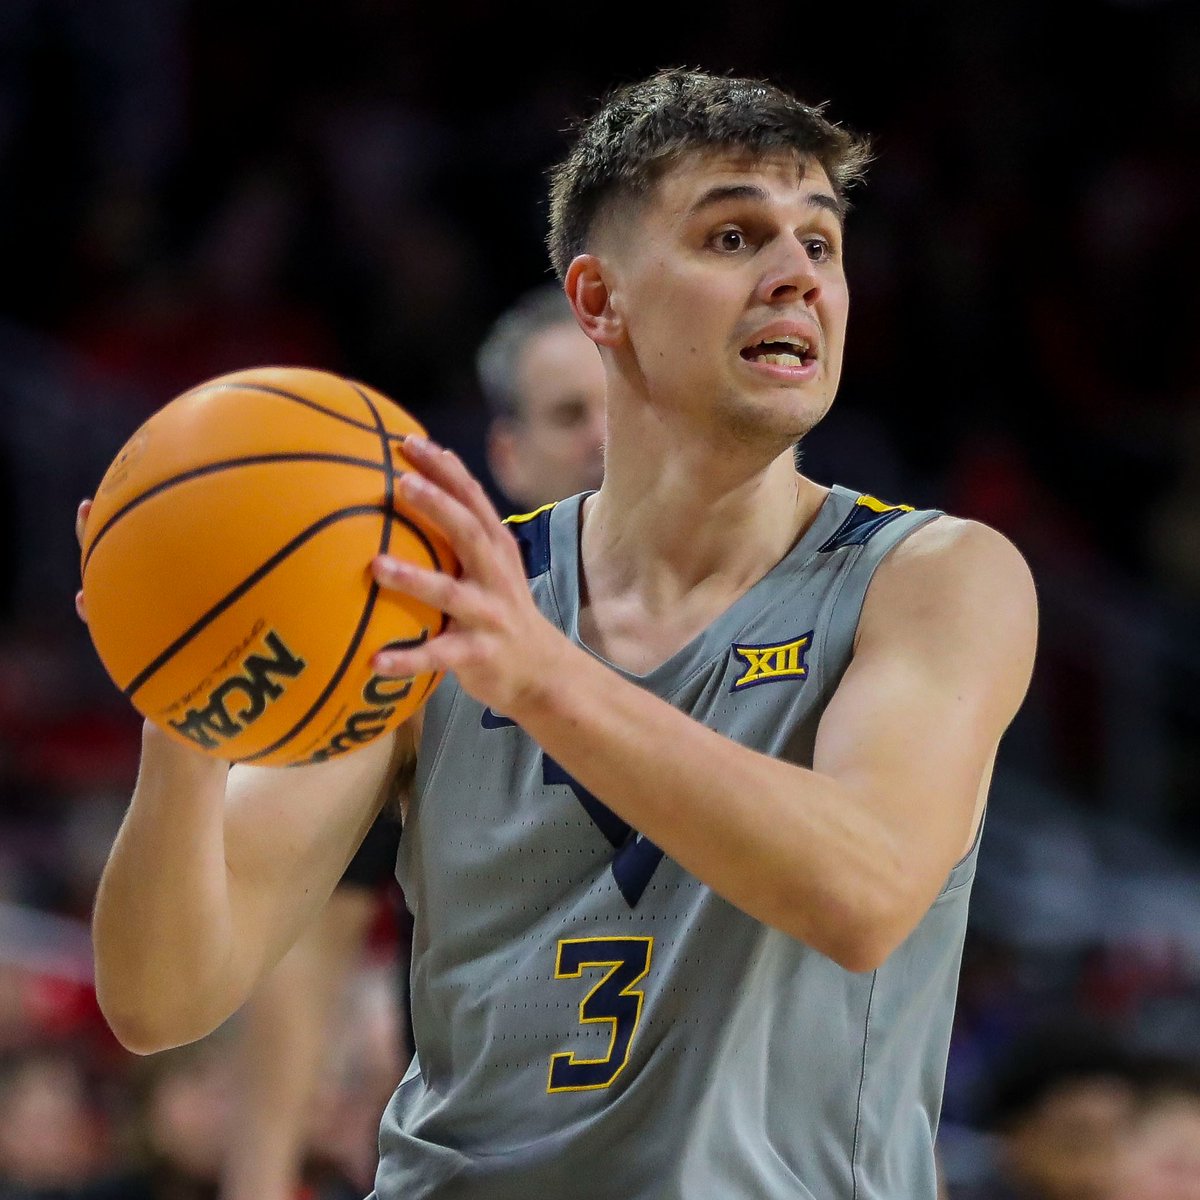 NEWS: West Virginia transfer Kerr Kriisa has committed to Kentucky, he told ESPN. 

Head coach Mark Pope pursued Kriisa on two separate occasions out of high school and upon transferring out of Arizona, finally securing his commitment the third time around.